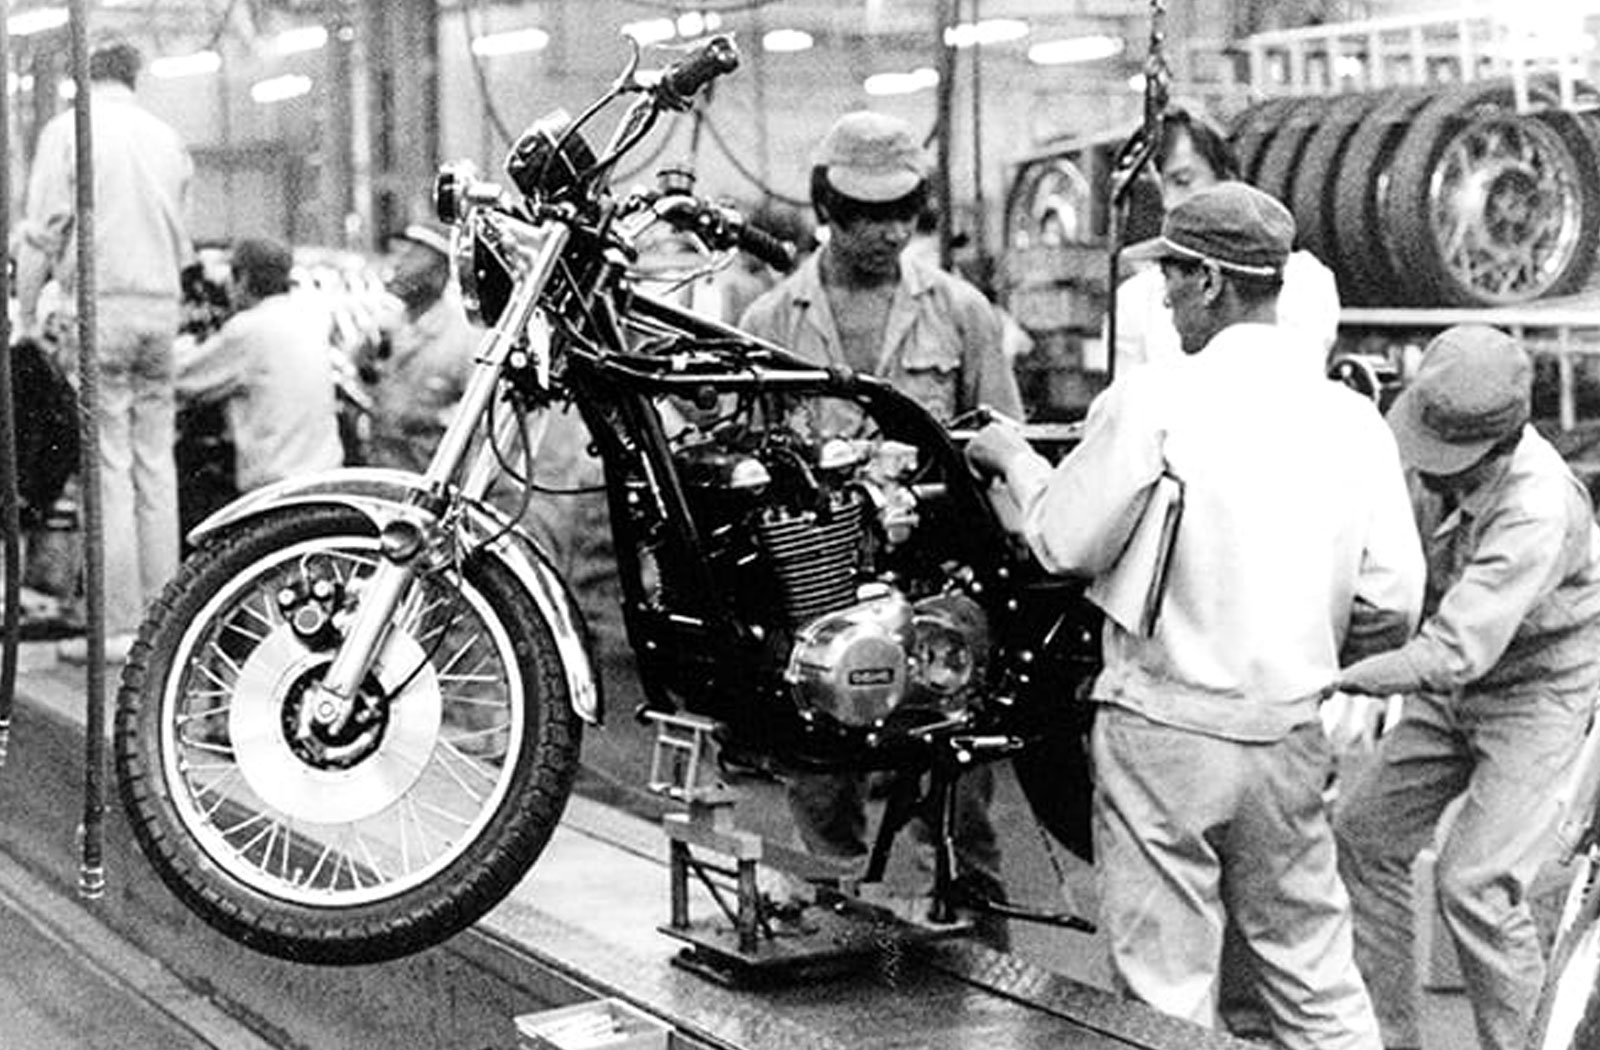 Kawasaki Z1 being built in the factory